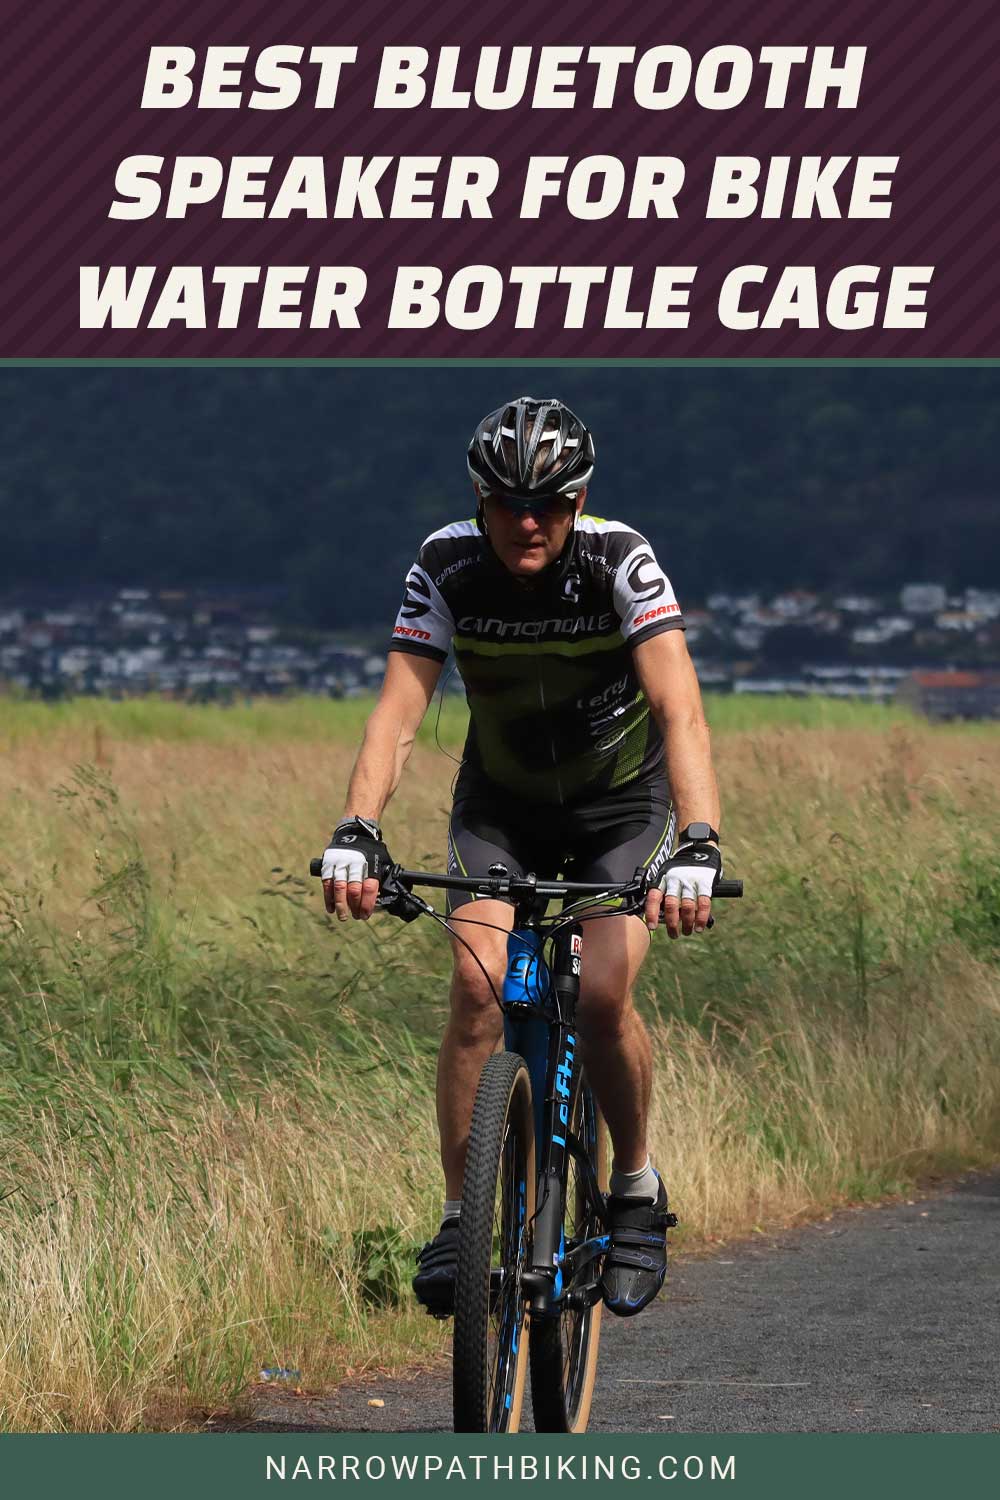 Person riding a bike on a road near tall grass - Best Bluetooth Speaker for Bike Water Bottle Cage.